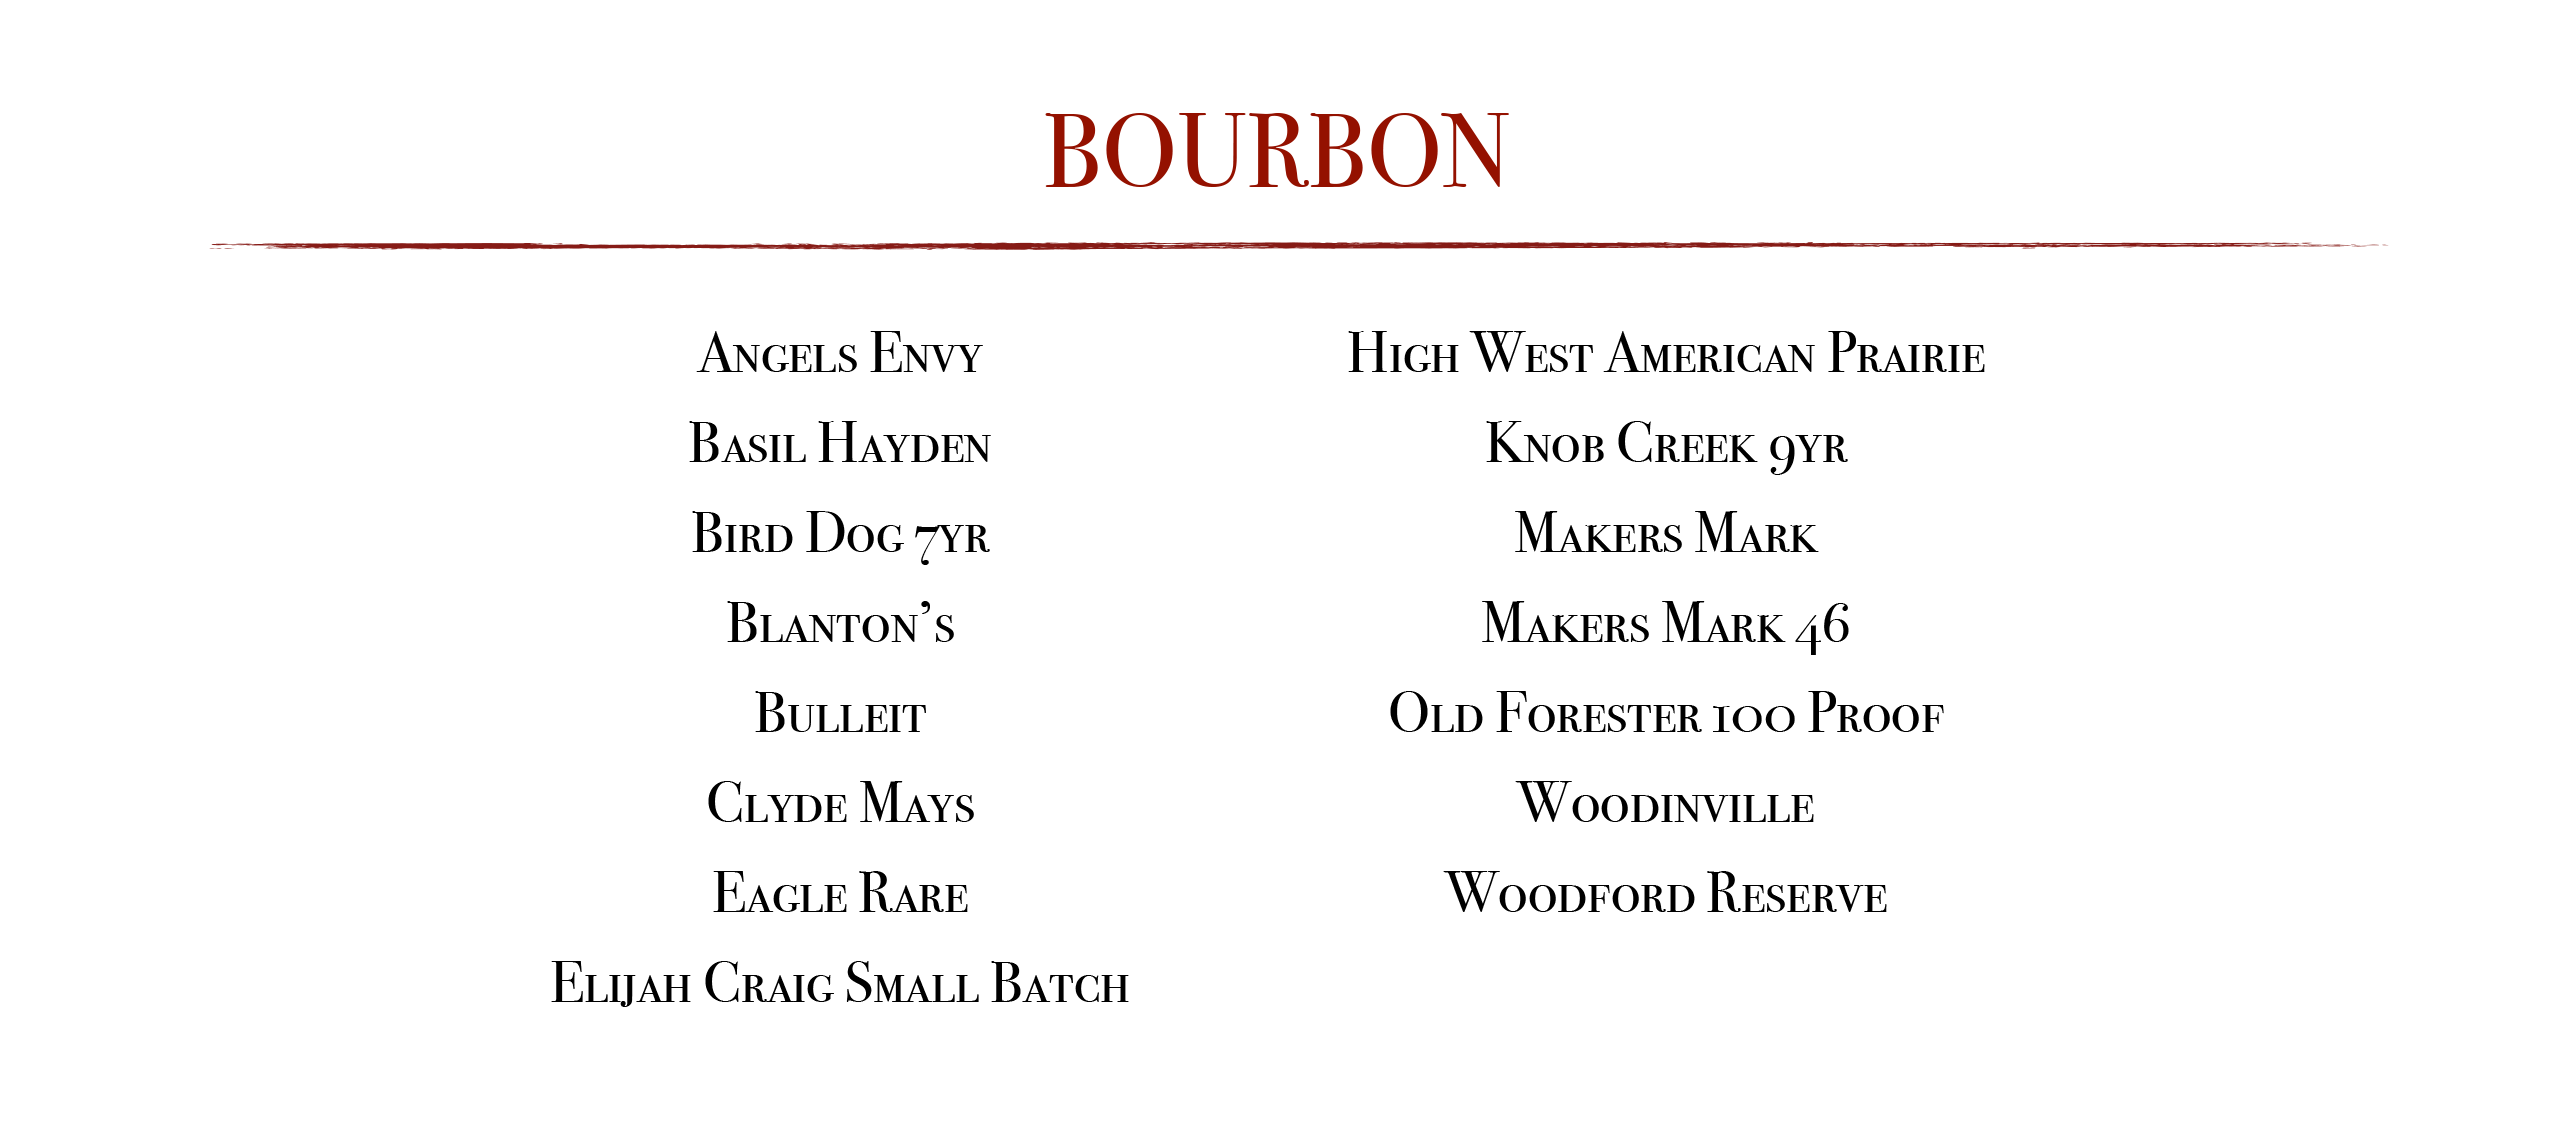 Bourbon: Angel's Envy, Basil Hayden, Bird Dog 7yr, Blanton's, Bulleit, Clyde Mays, Eagle Rare, Elijah Craig Small Batch, High West American Prairie, Knob Creek 9yr, Makers Mark, Makers Mark 46, Old Forester 100 Proof, Woodinville, Woodford Reserve 